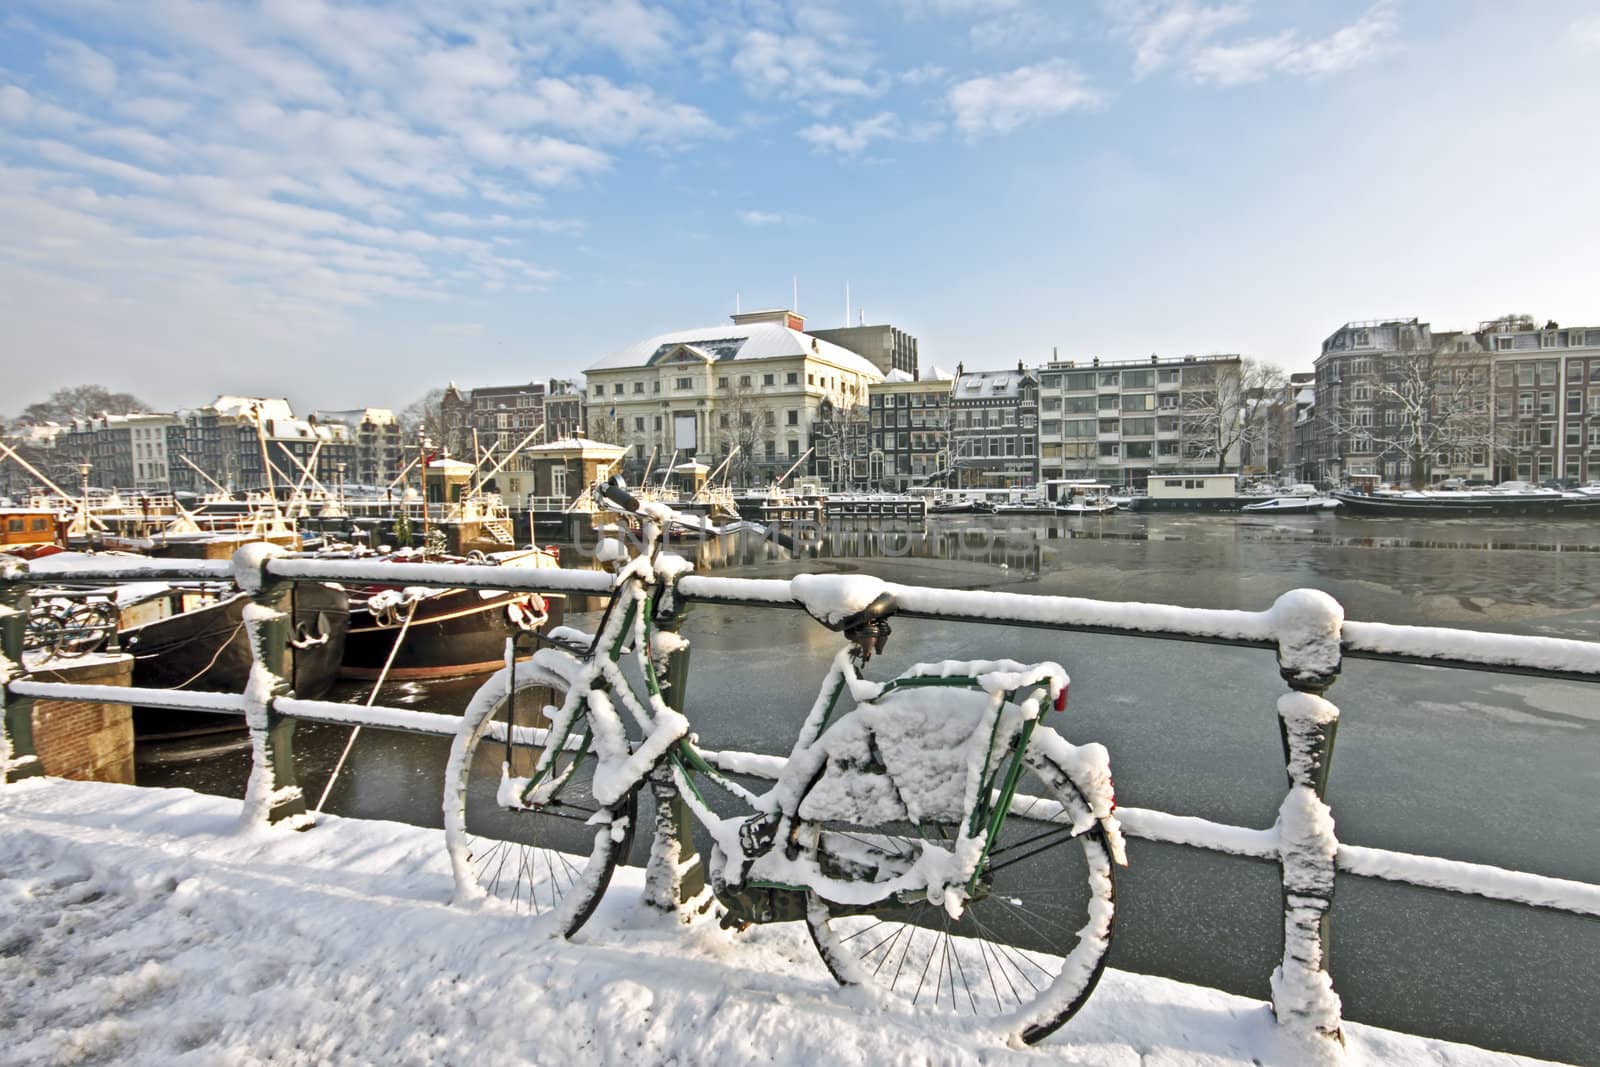 Snowy Amsterdam at the Amstel in the Netherlands